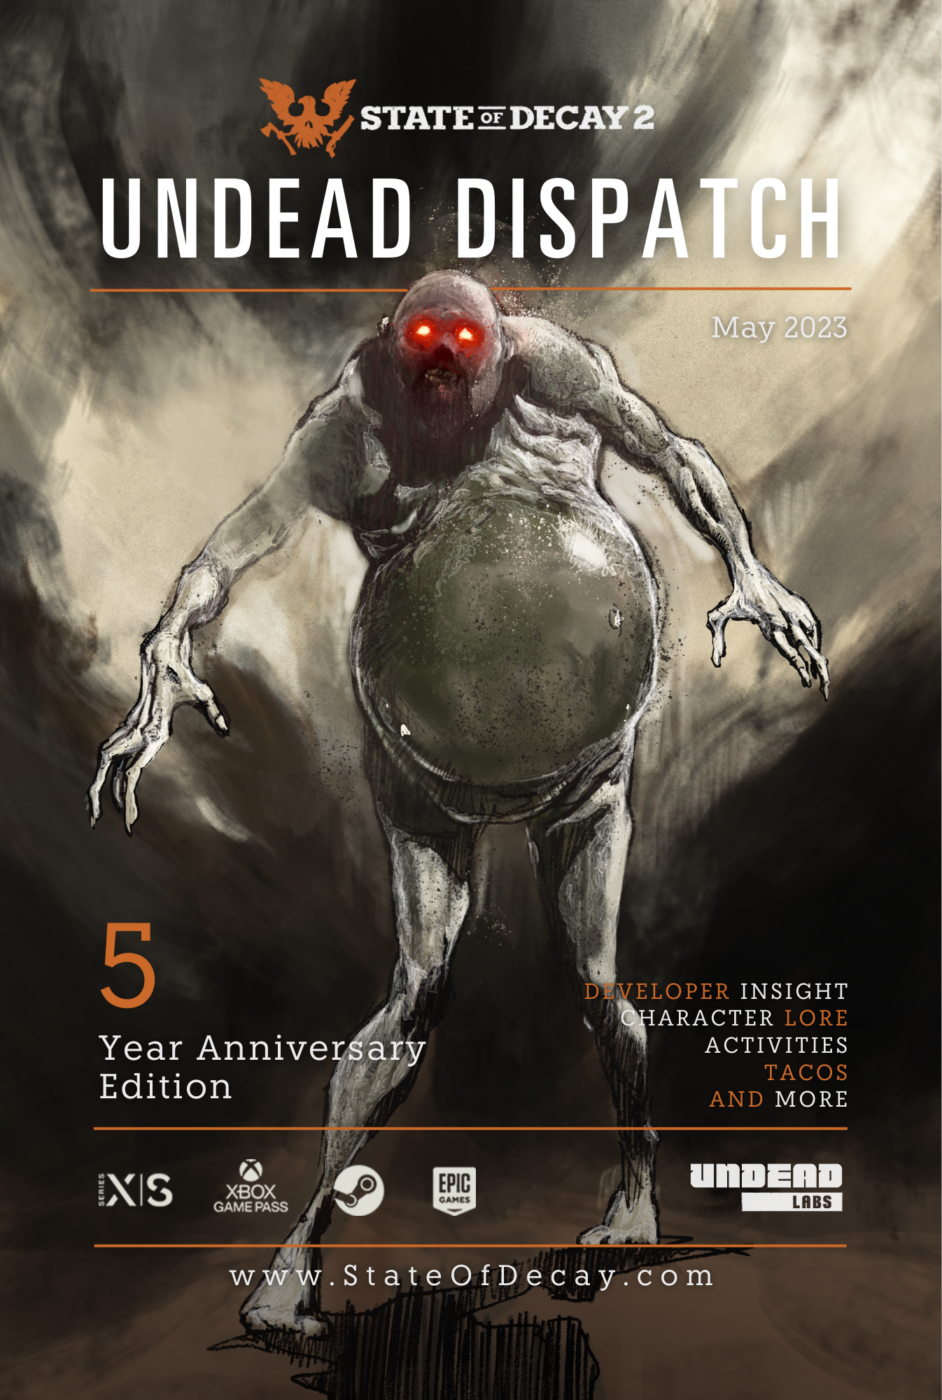 Cover page for the Undead Labs Dispatch Anniversary Zine. Cover features concept art of a bloater